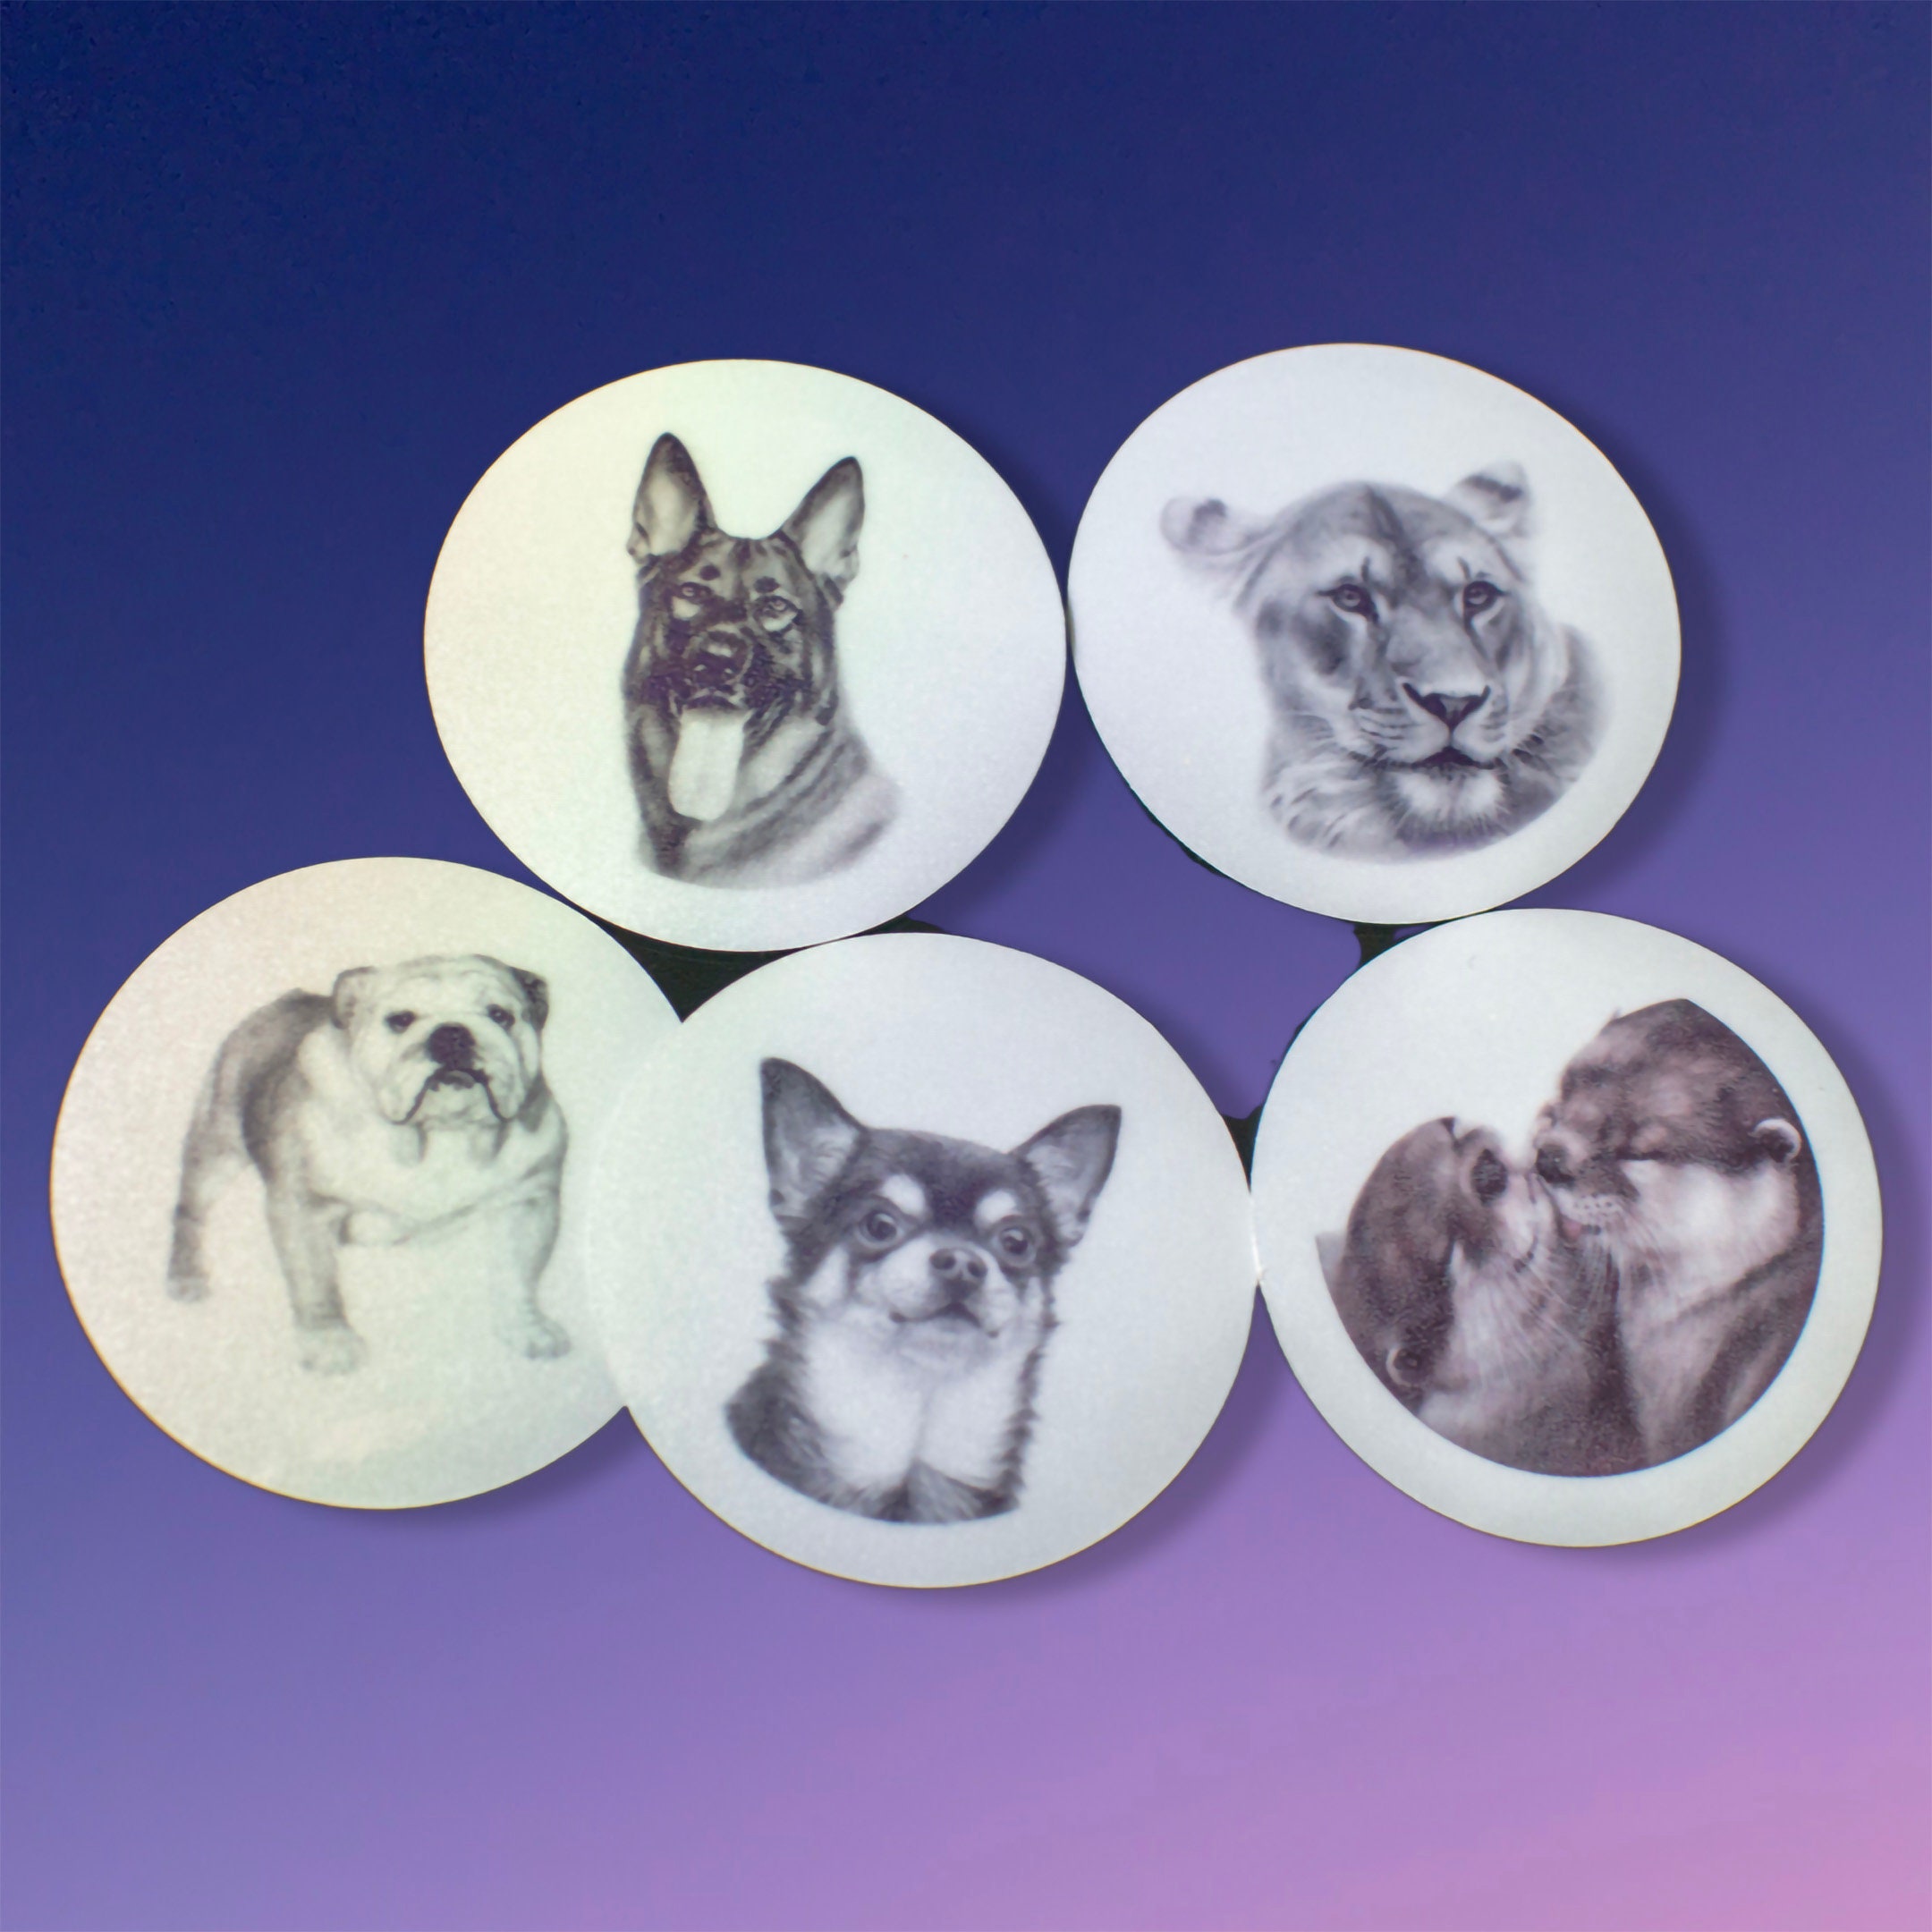 2 sets of 4 x Reflective Stickers Safety Stickers High Vis Visibility PAW PRINT 